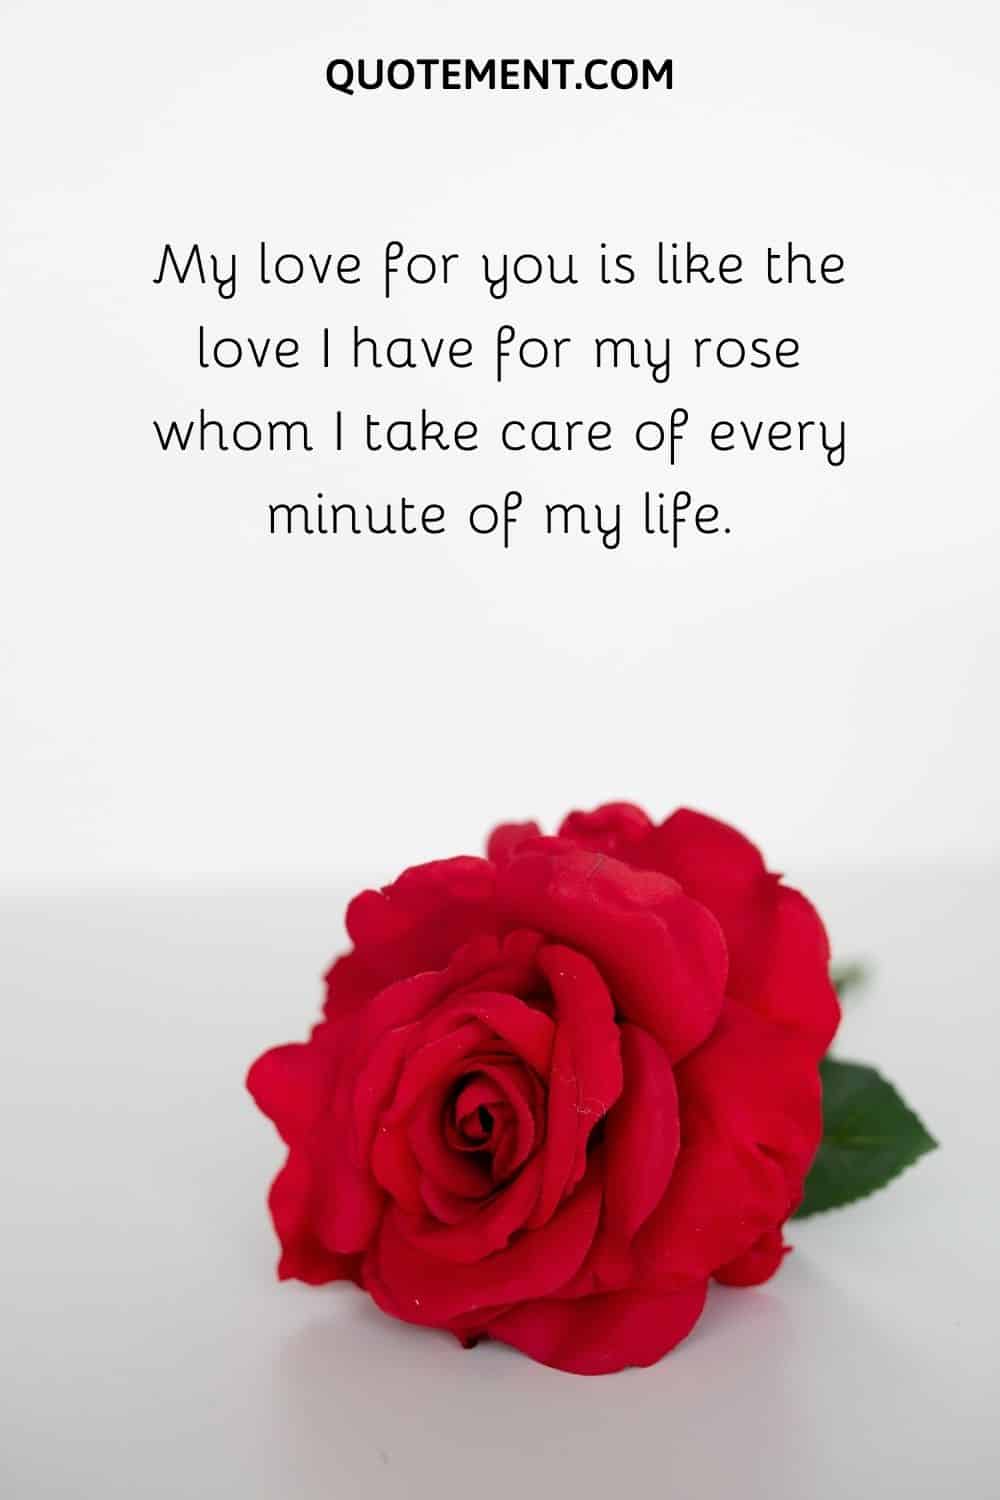 My love for you is like the love I have for my rose whom I take care of every minute of my life.